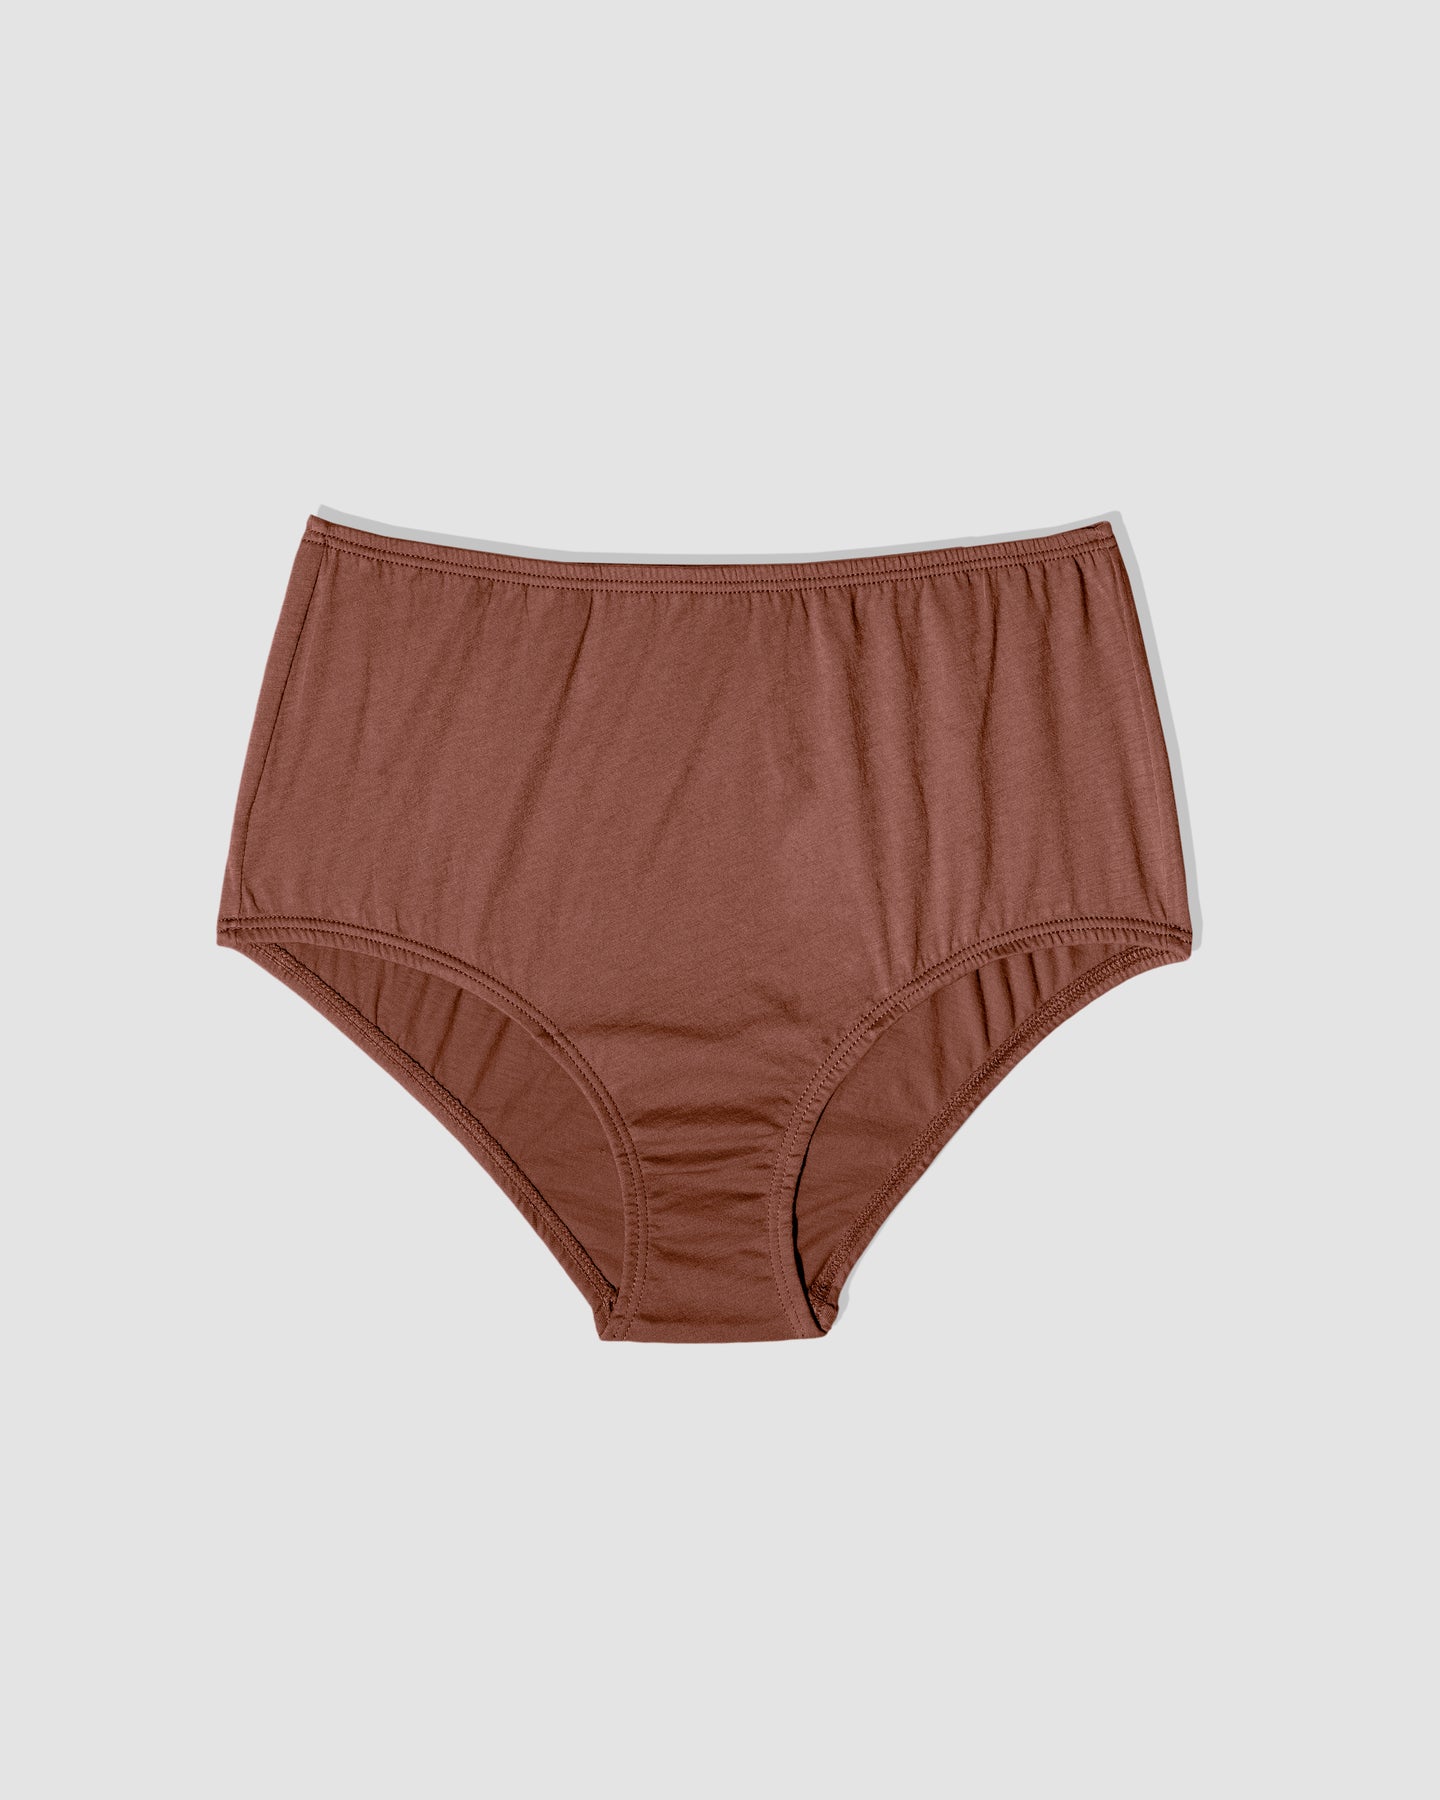 MISSWHO Cotton High Waisted Underwear For Women Butter Soft Full